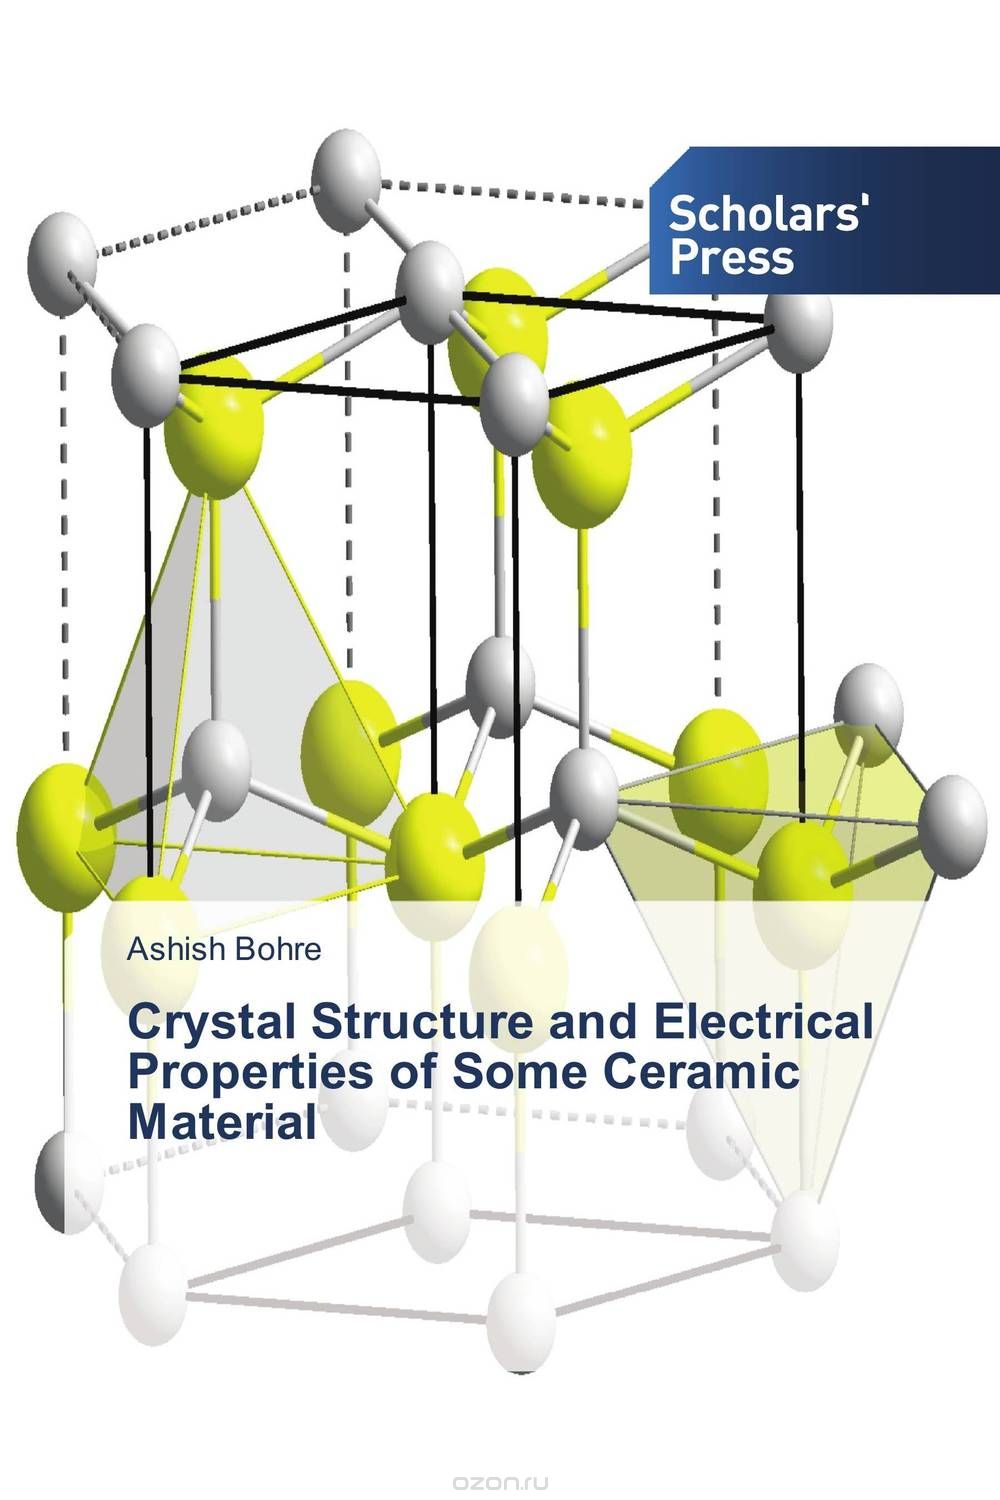 Crystal Structure and Electrical Properties of Some Ceramic Material